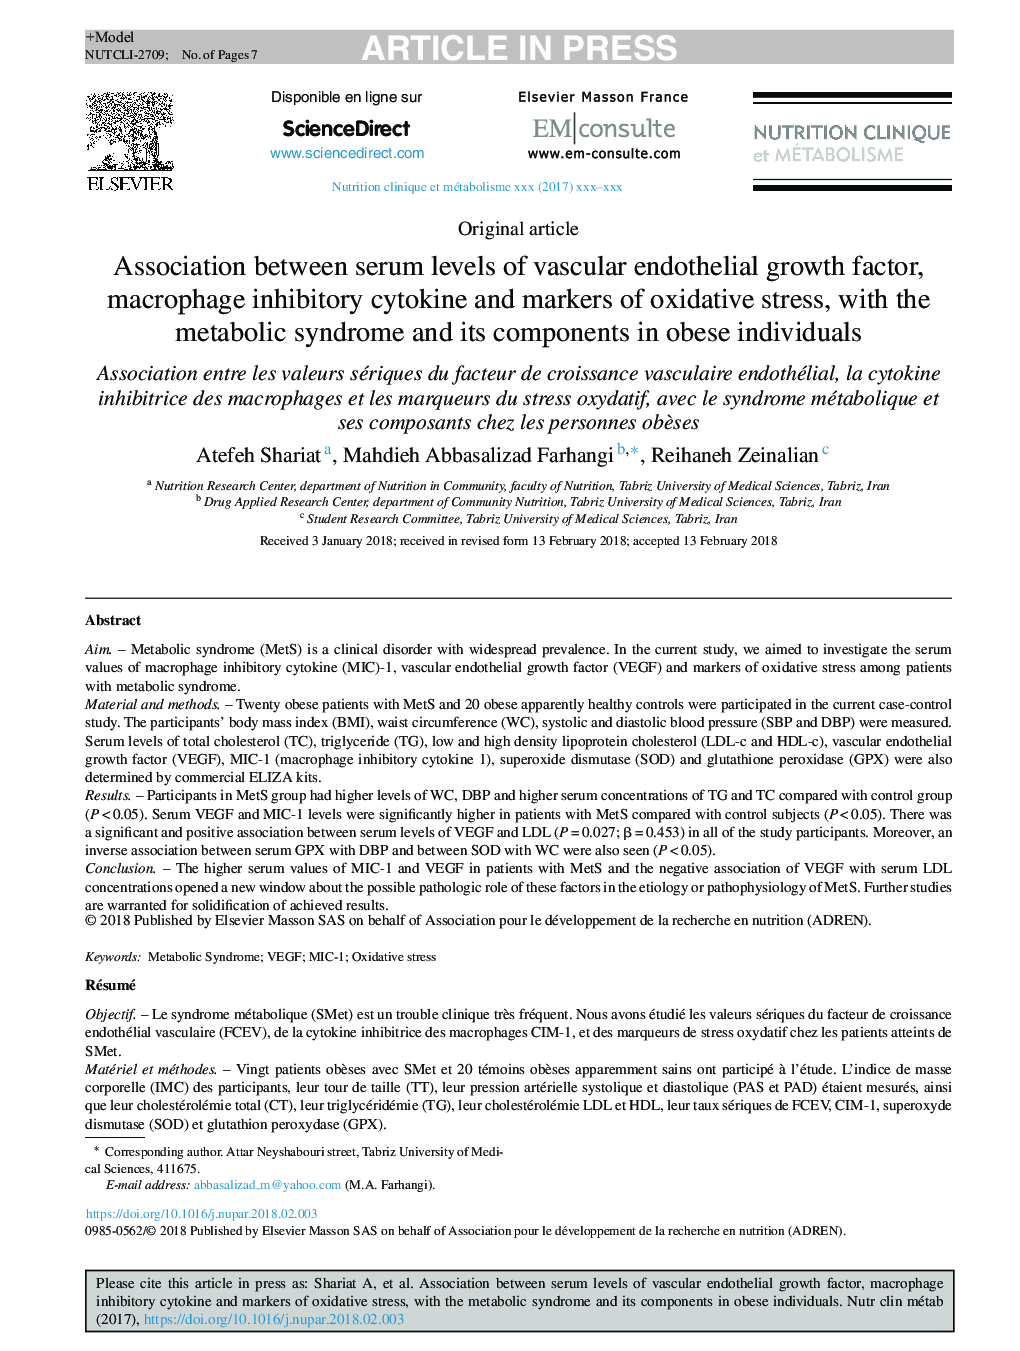 Association between serum levels of vascular endothelial growth factor, macrophage inhibitory cytokine and markers of oxidative stress, with the metabolic syndrome and its components in obese individuals